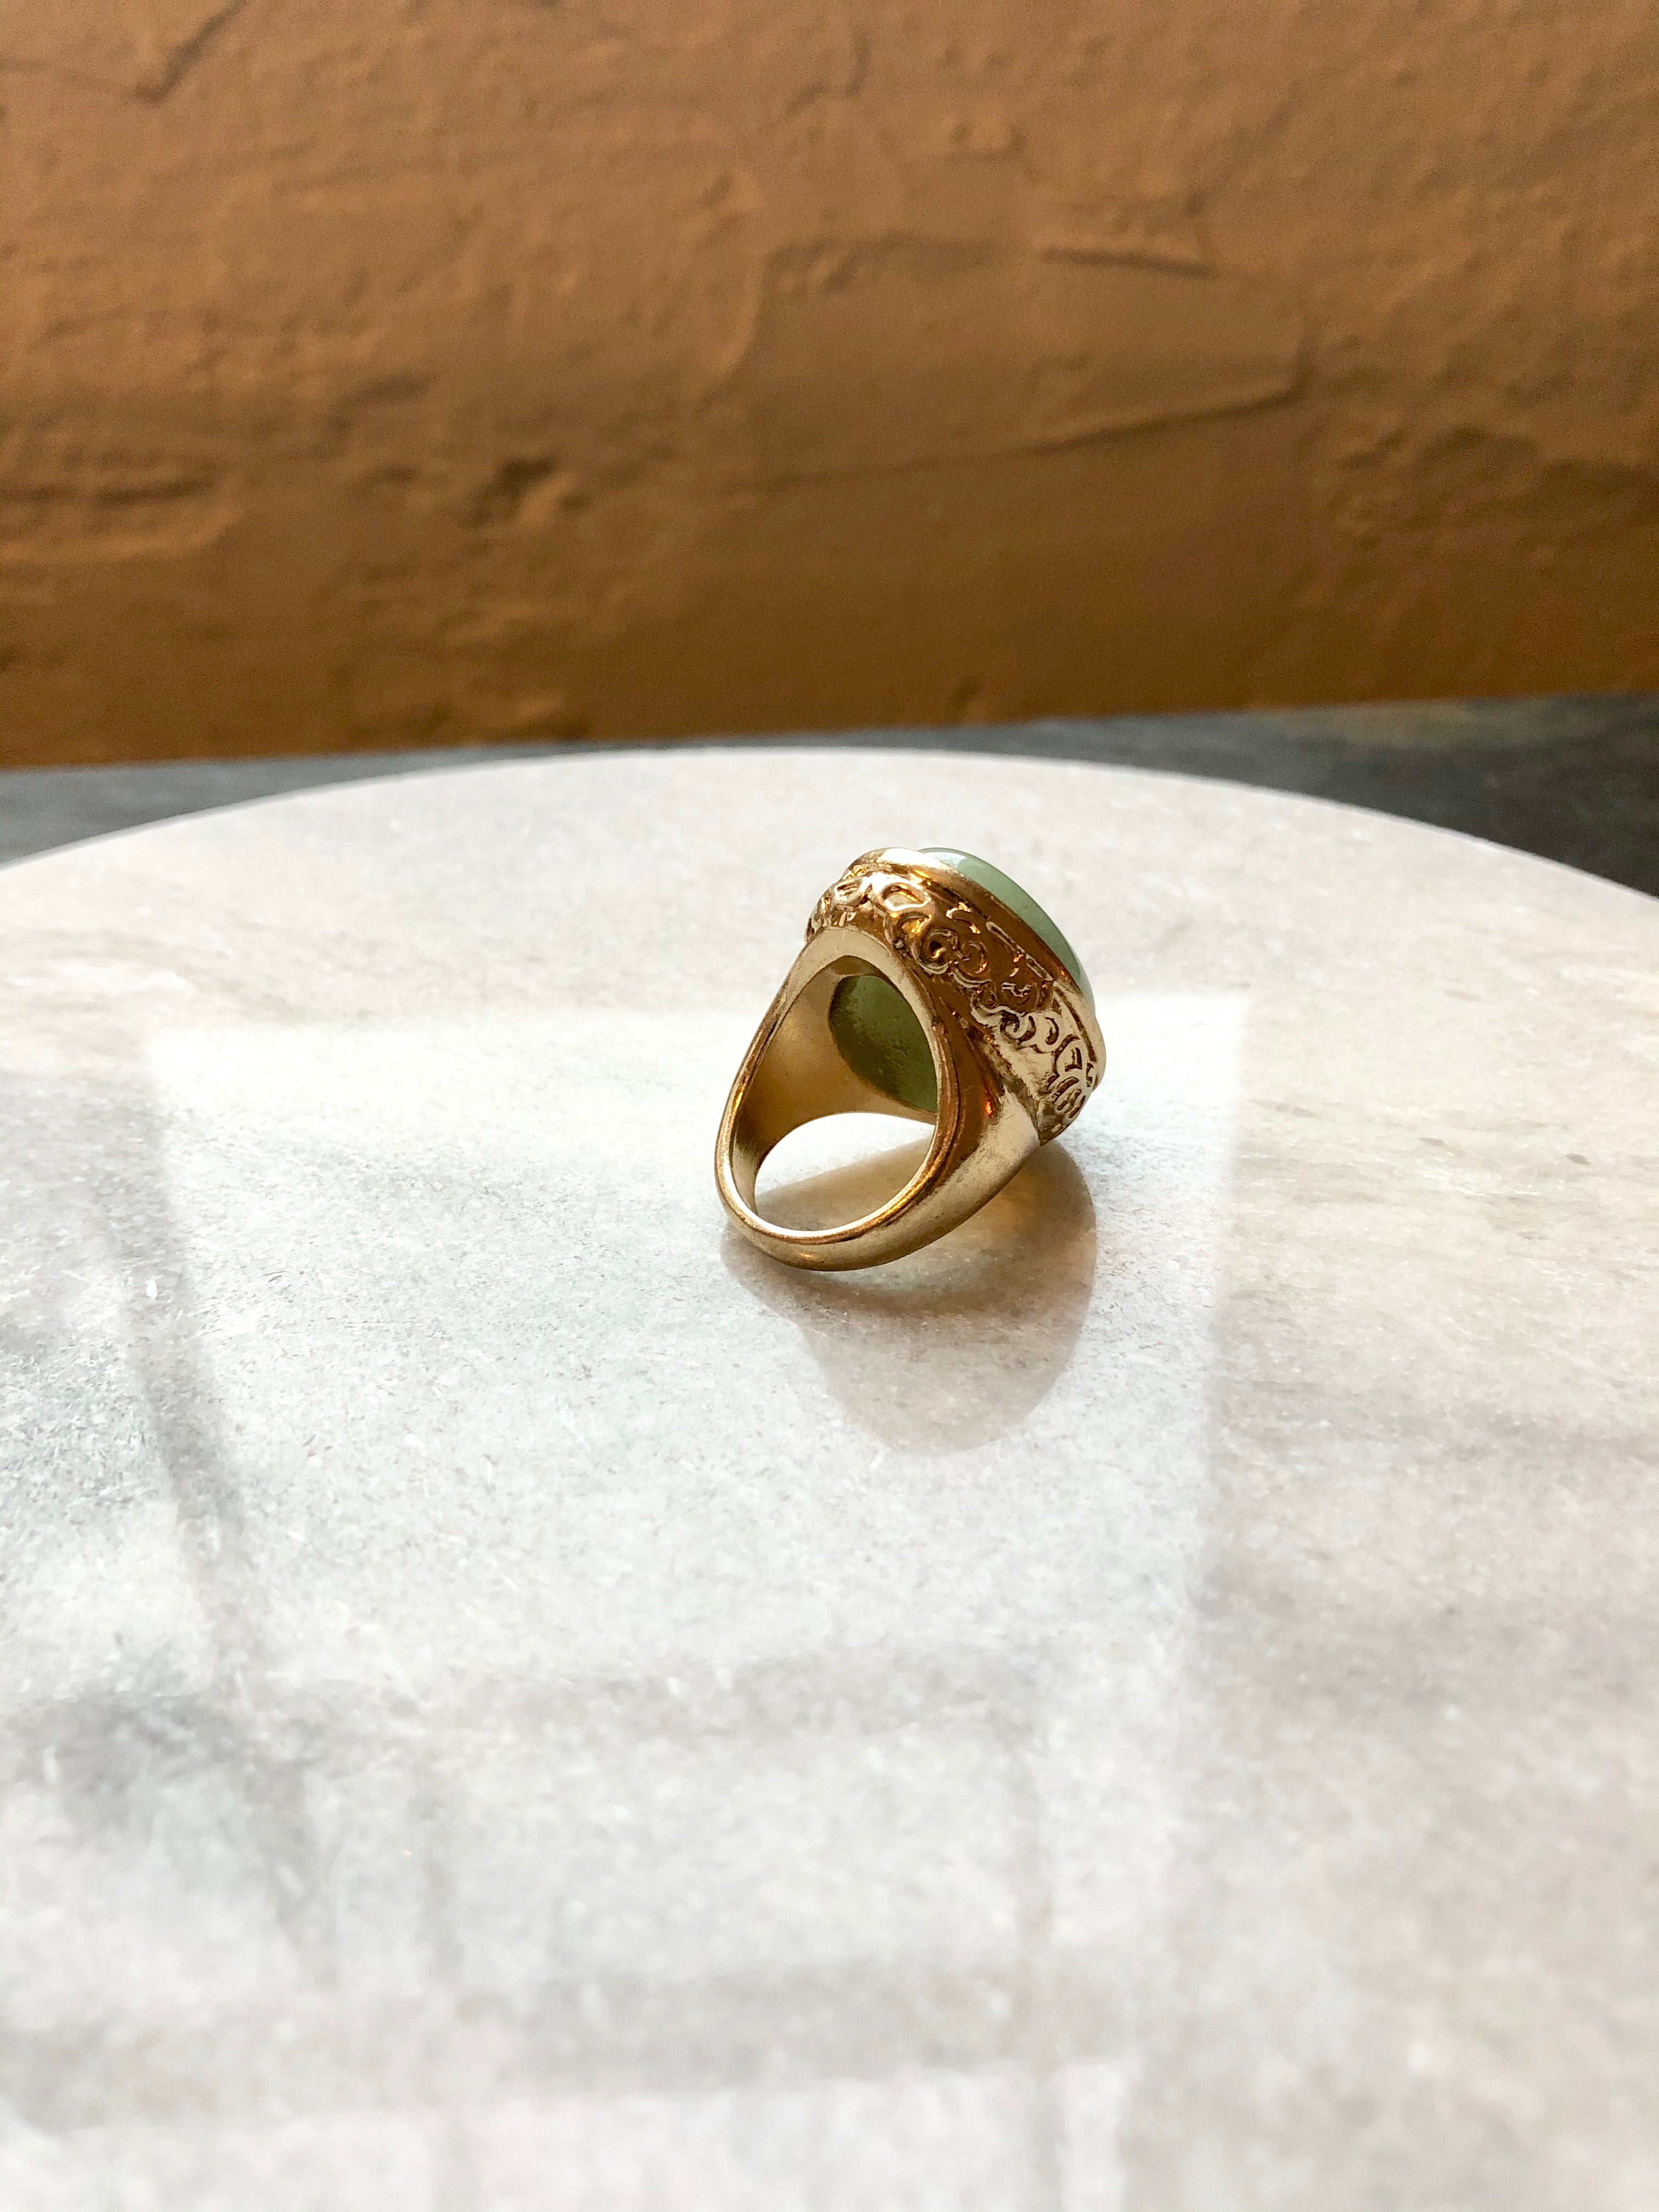 Cabochon Green Nephrite Jade Gold Ring